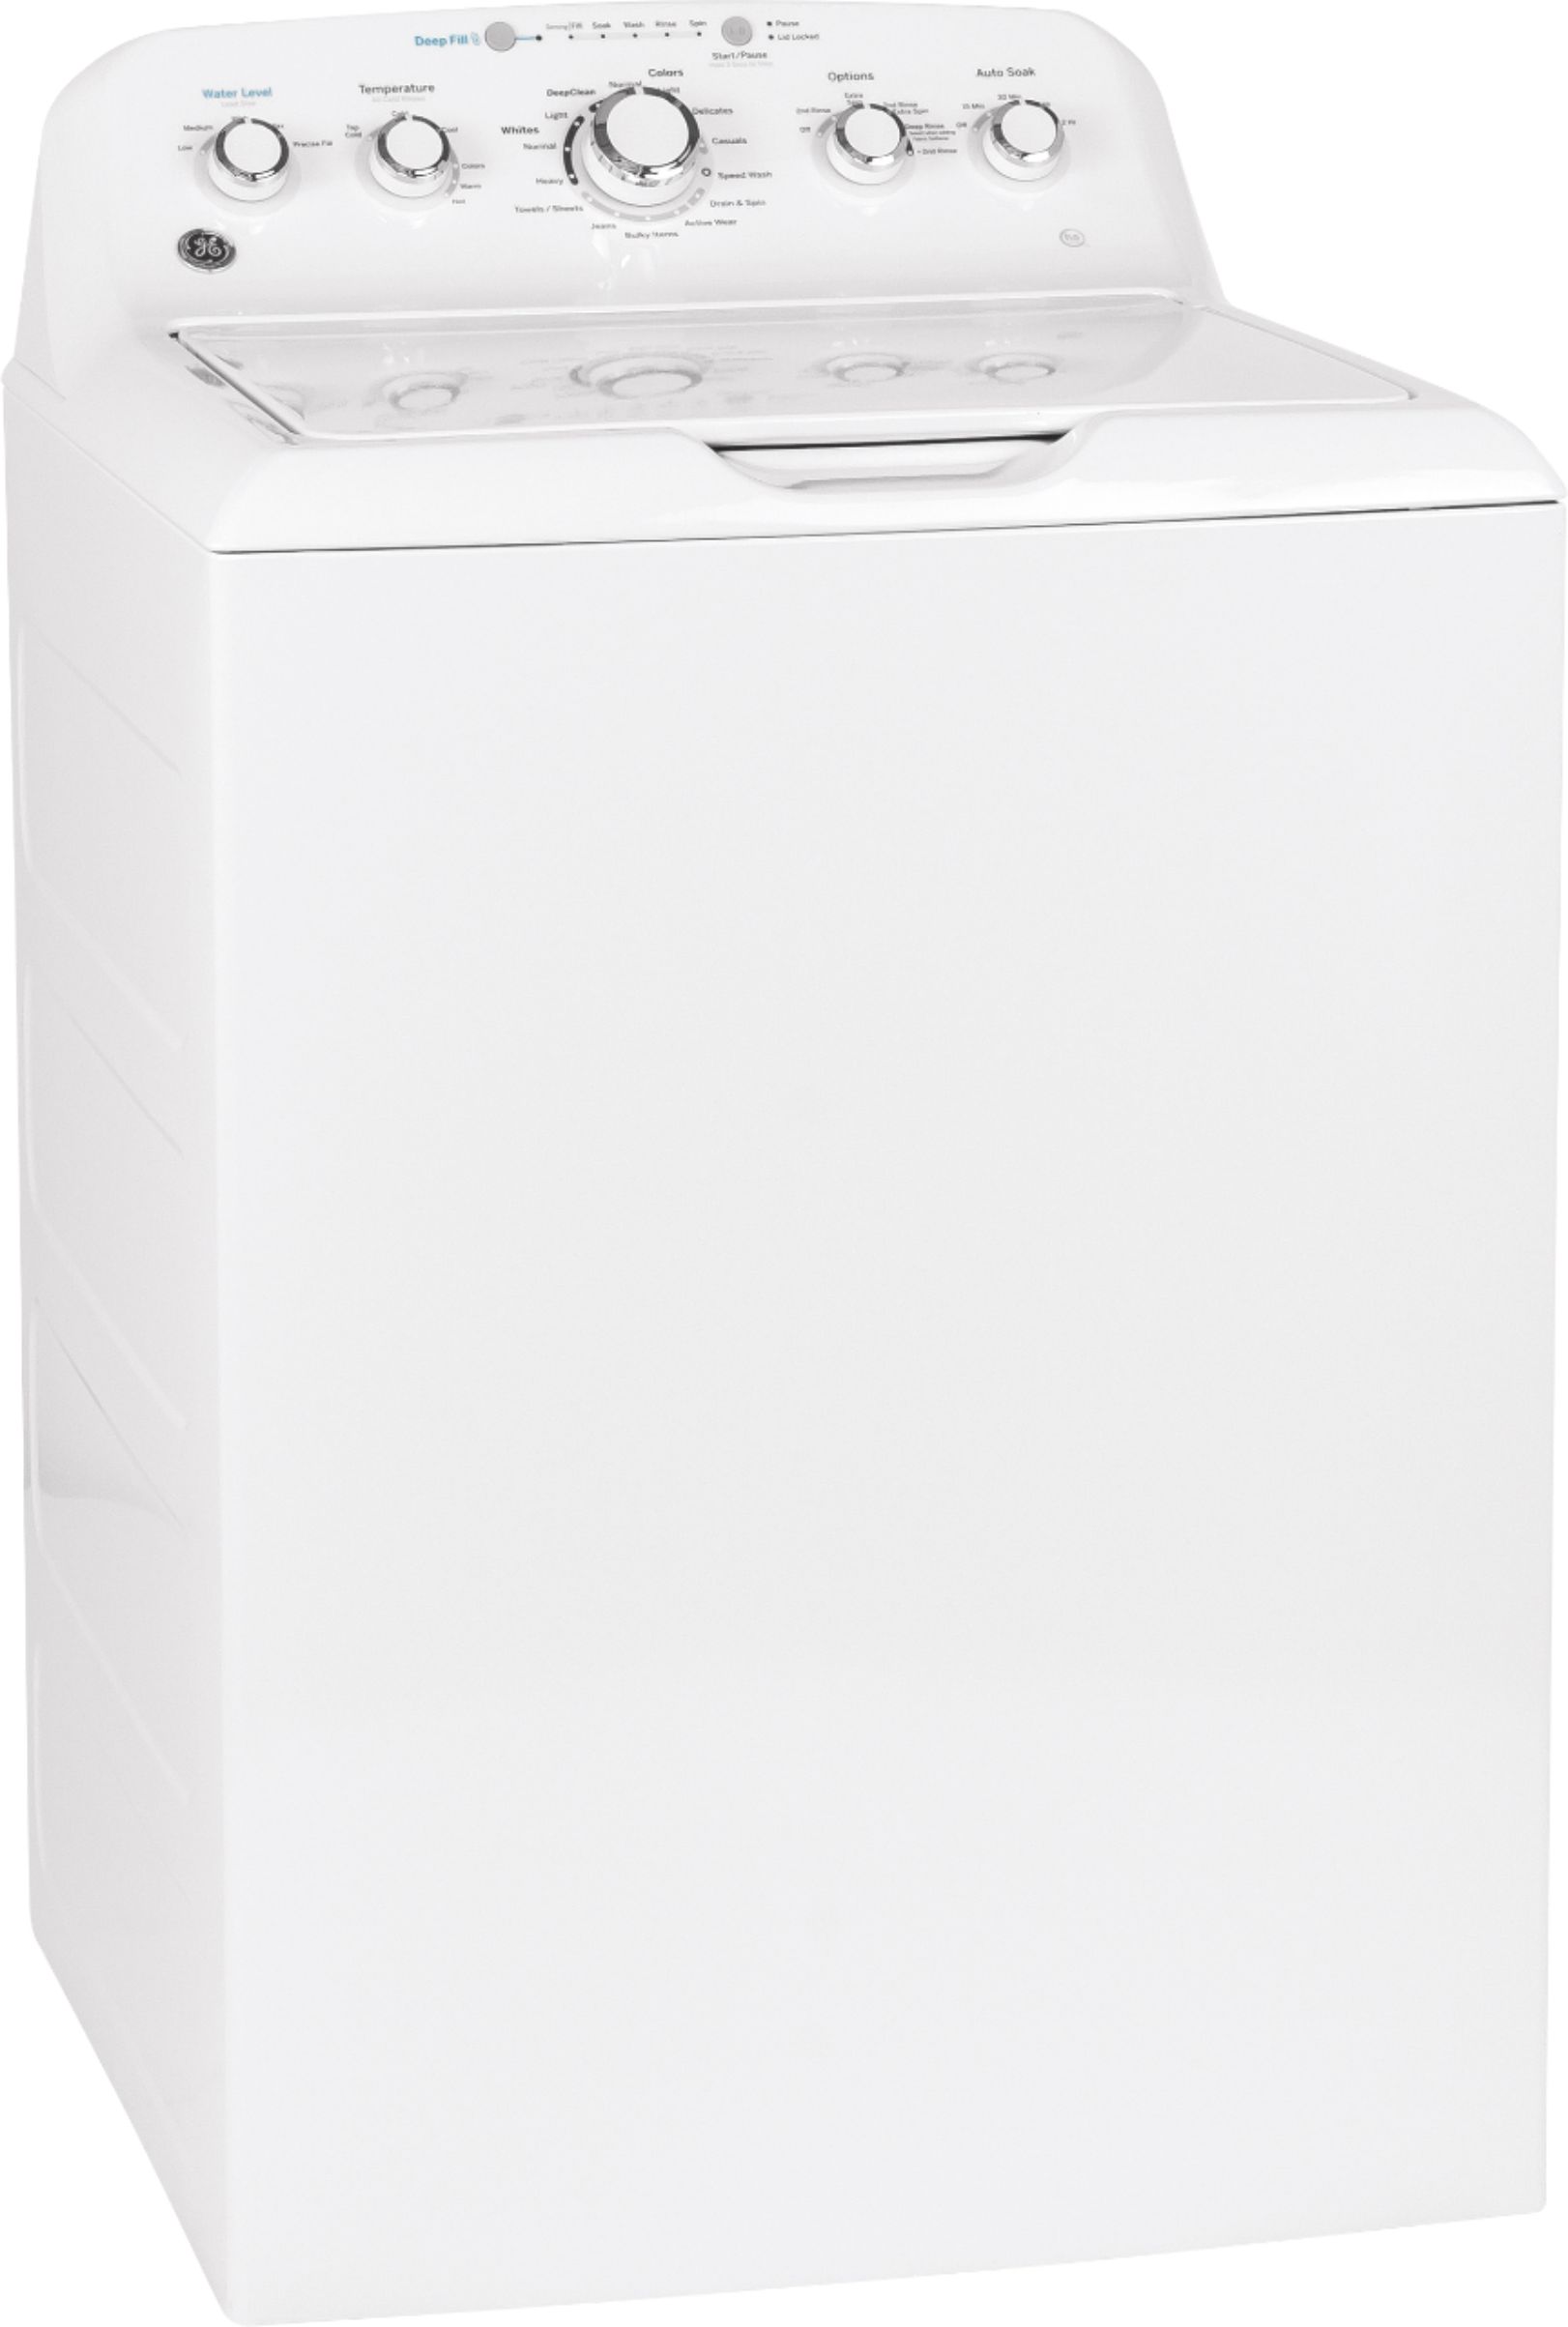 Angle View: GE - 4.5 Cu. Ft. Top Load Washer with Precise Fill - White on White